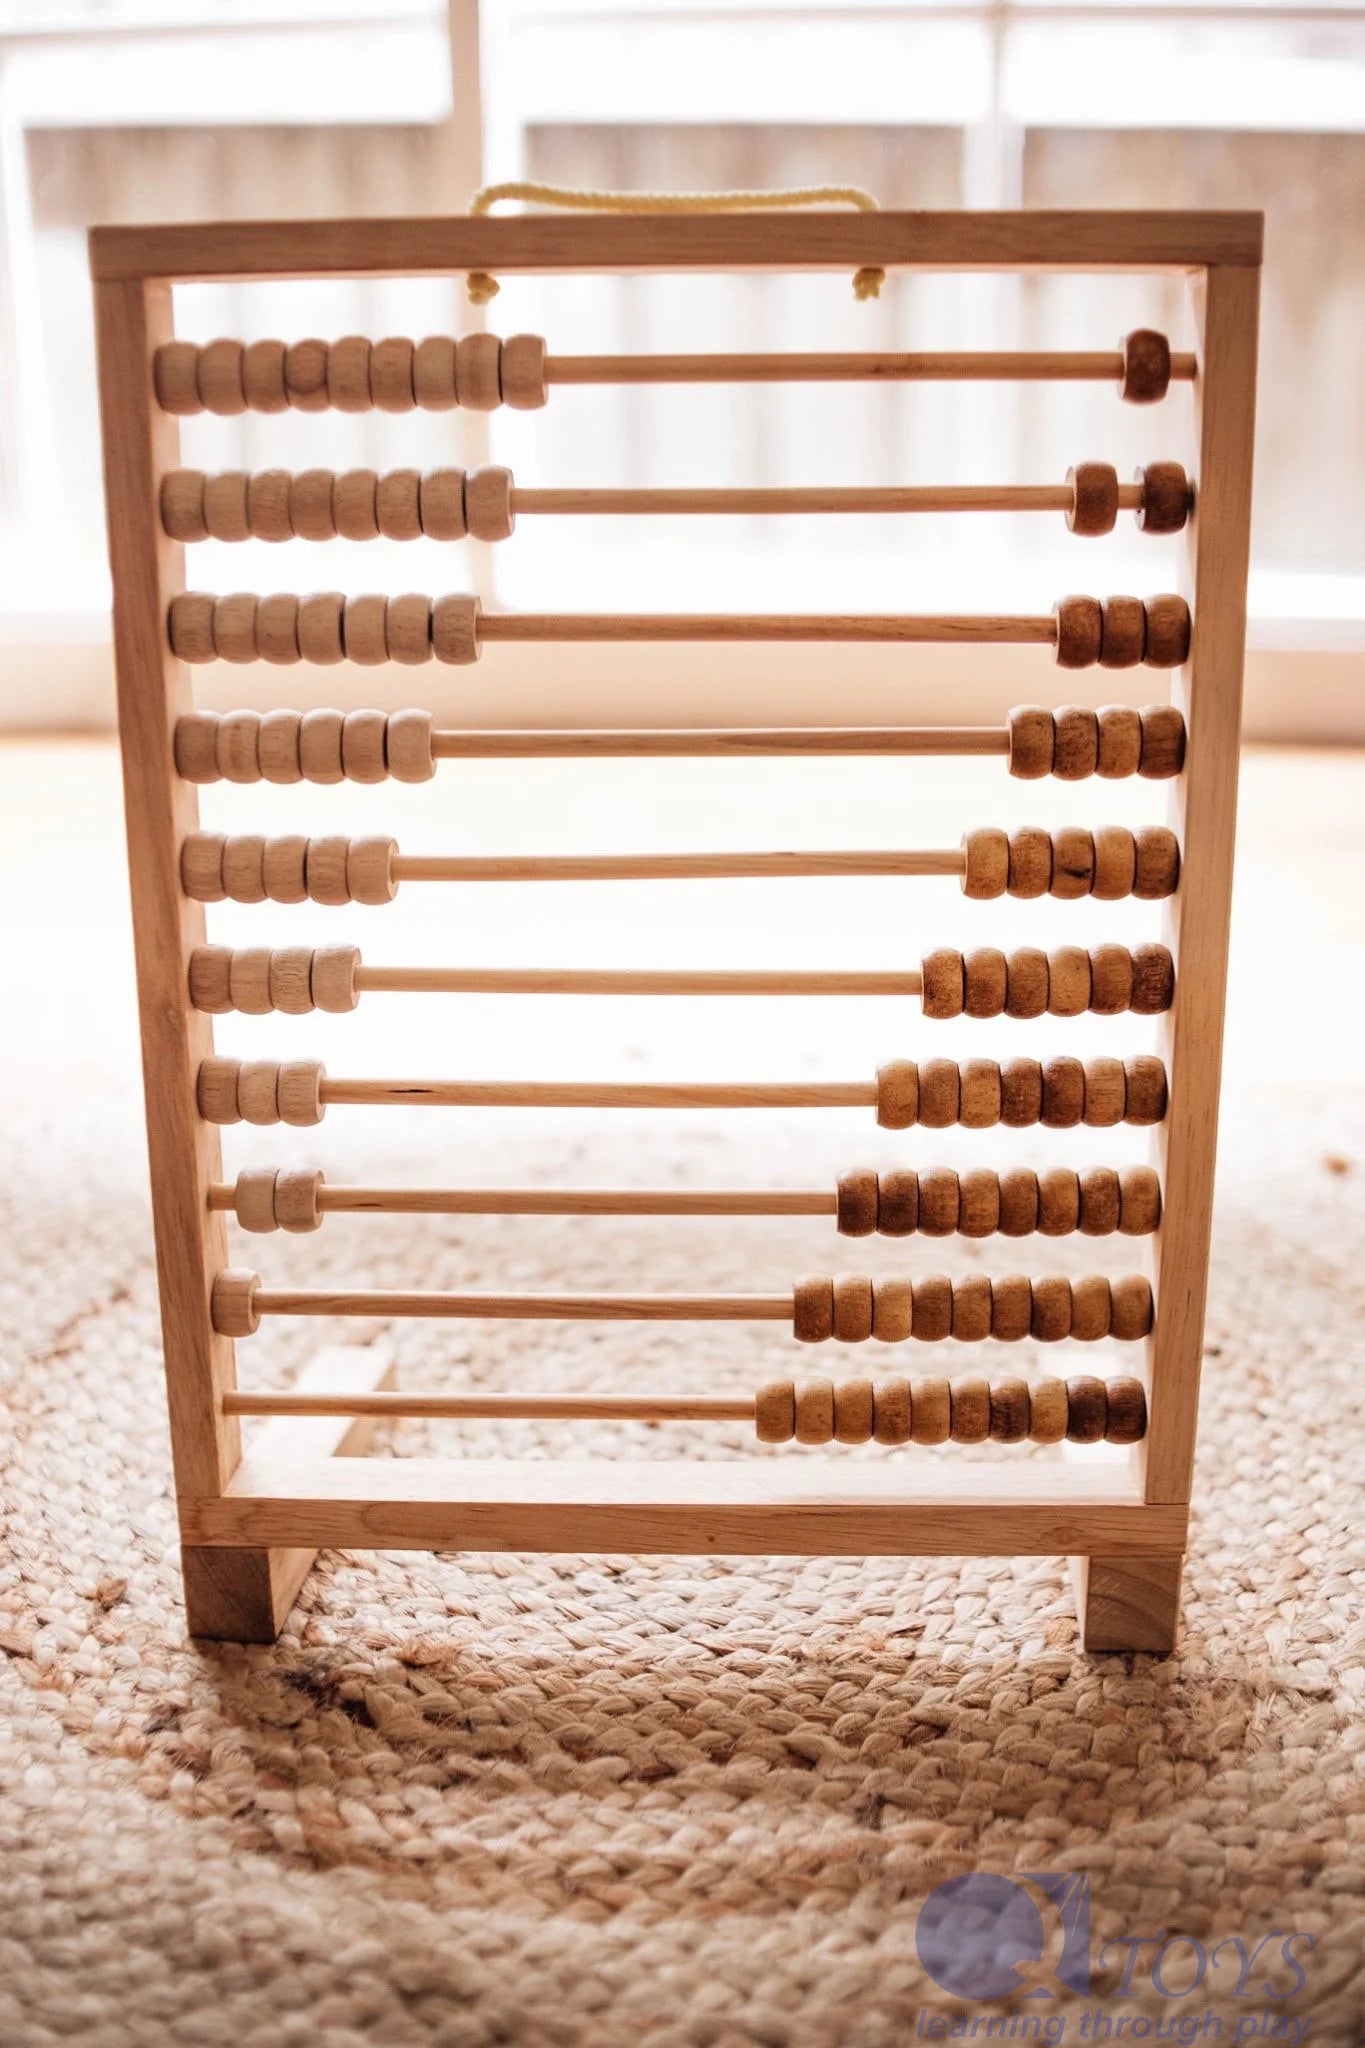 Giant Abacus